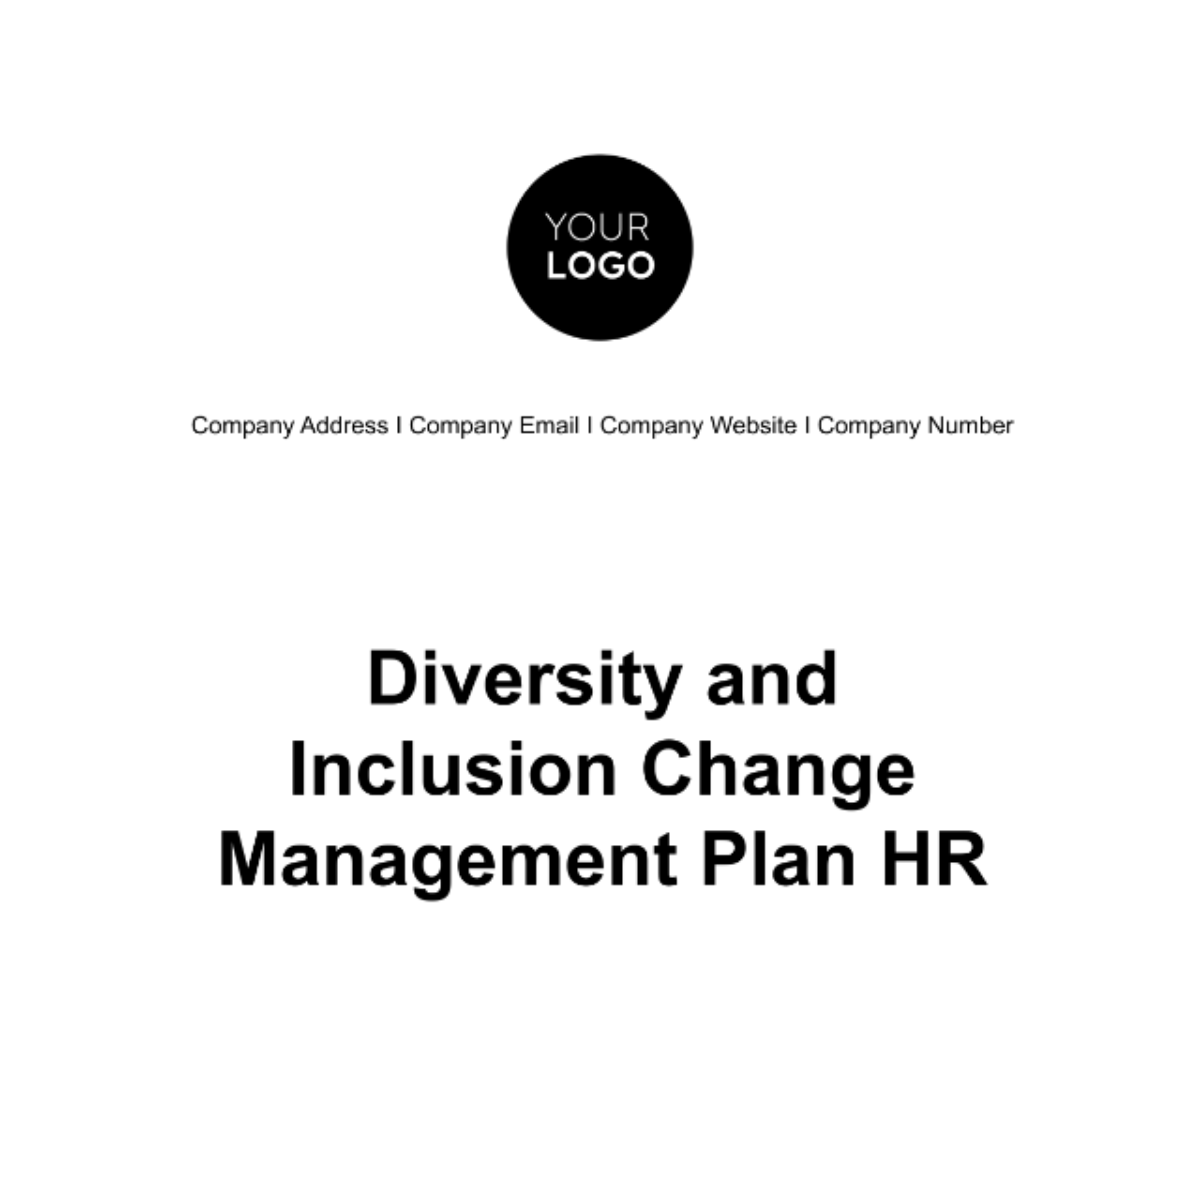 Diversity and Inclusion Change Management Plan HR Template